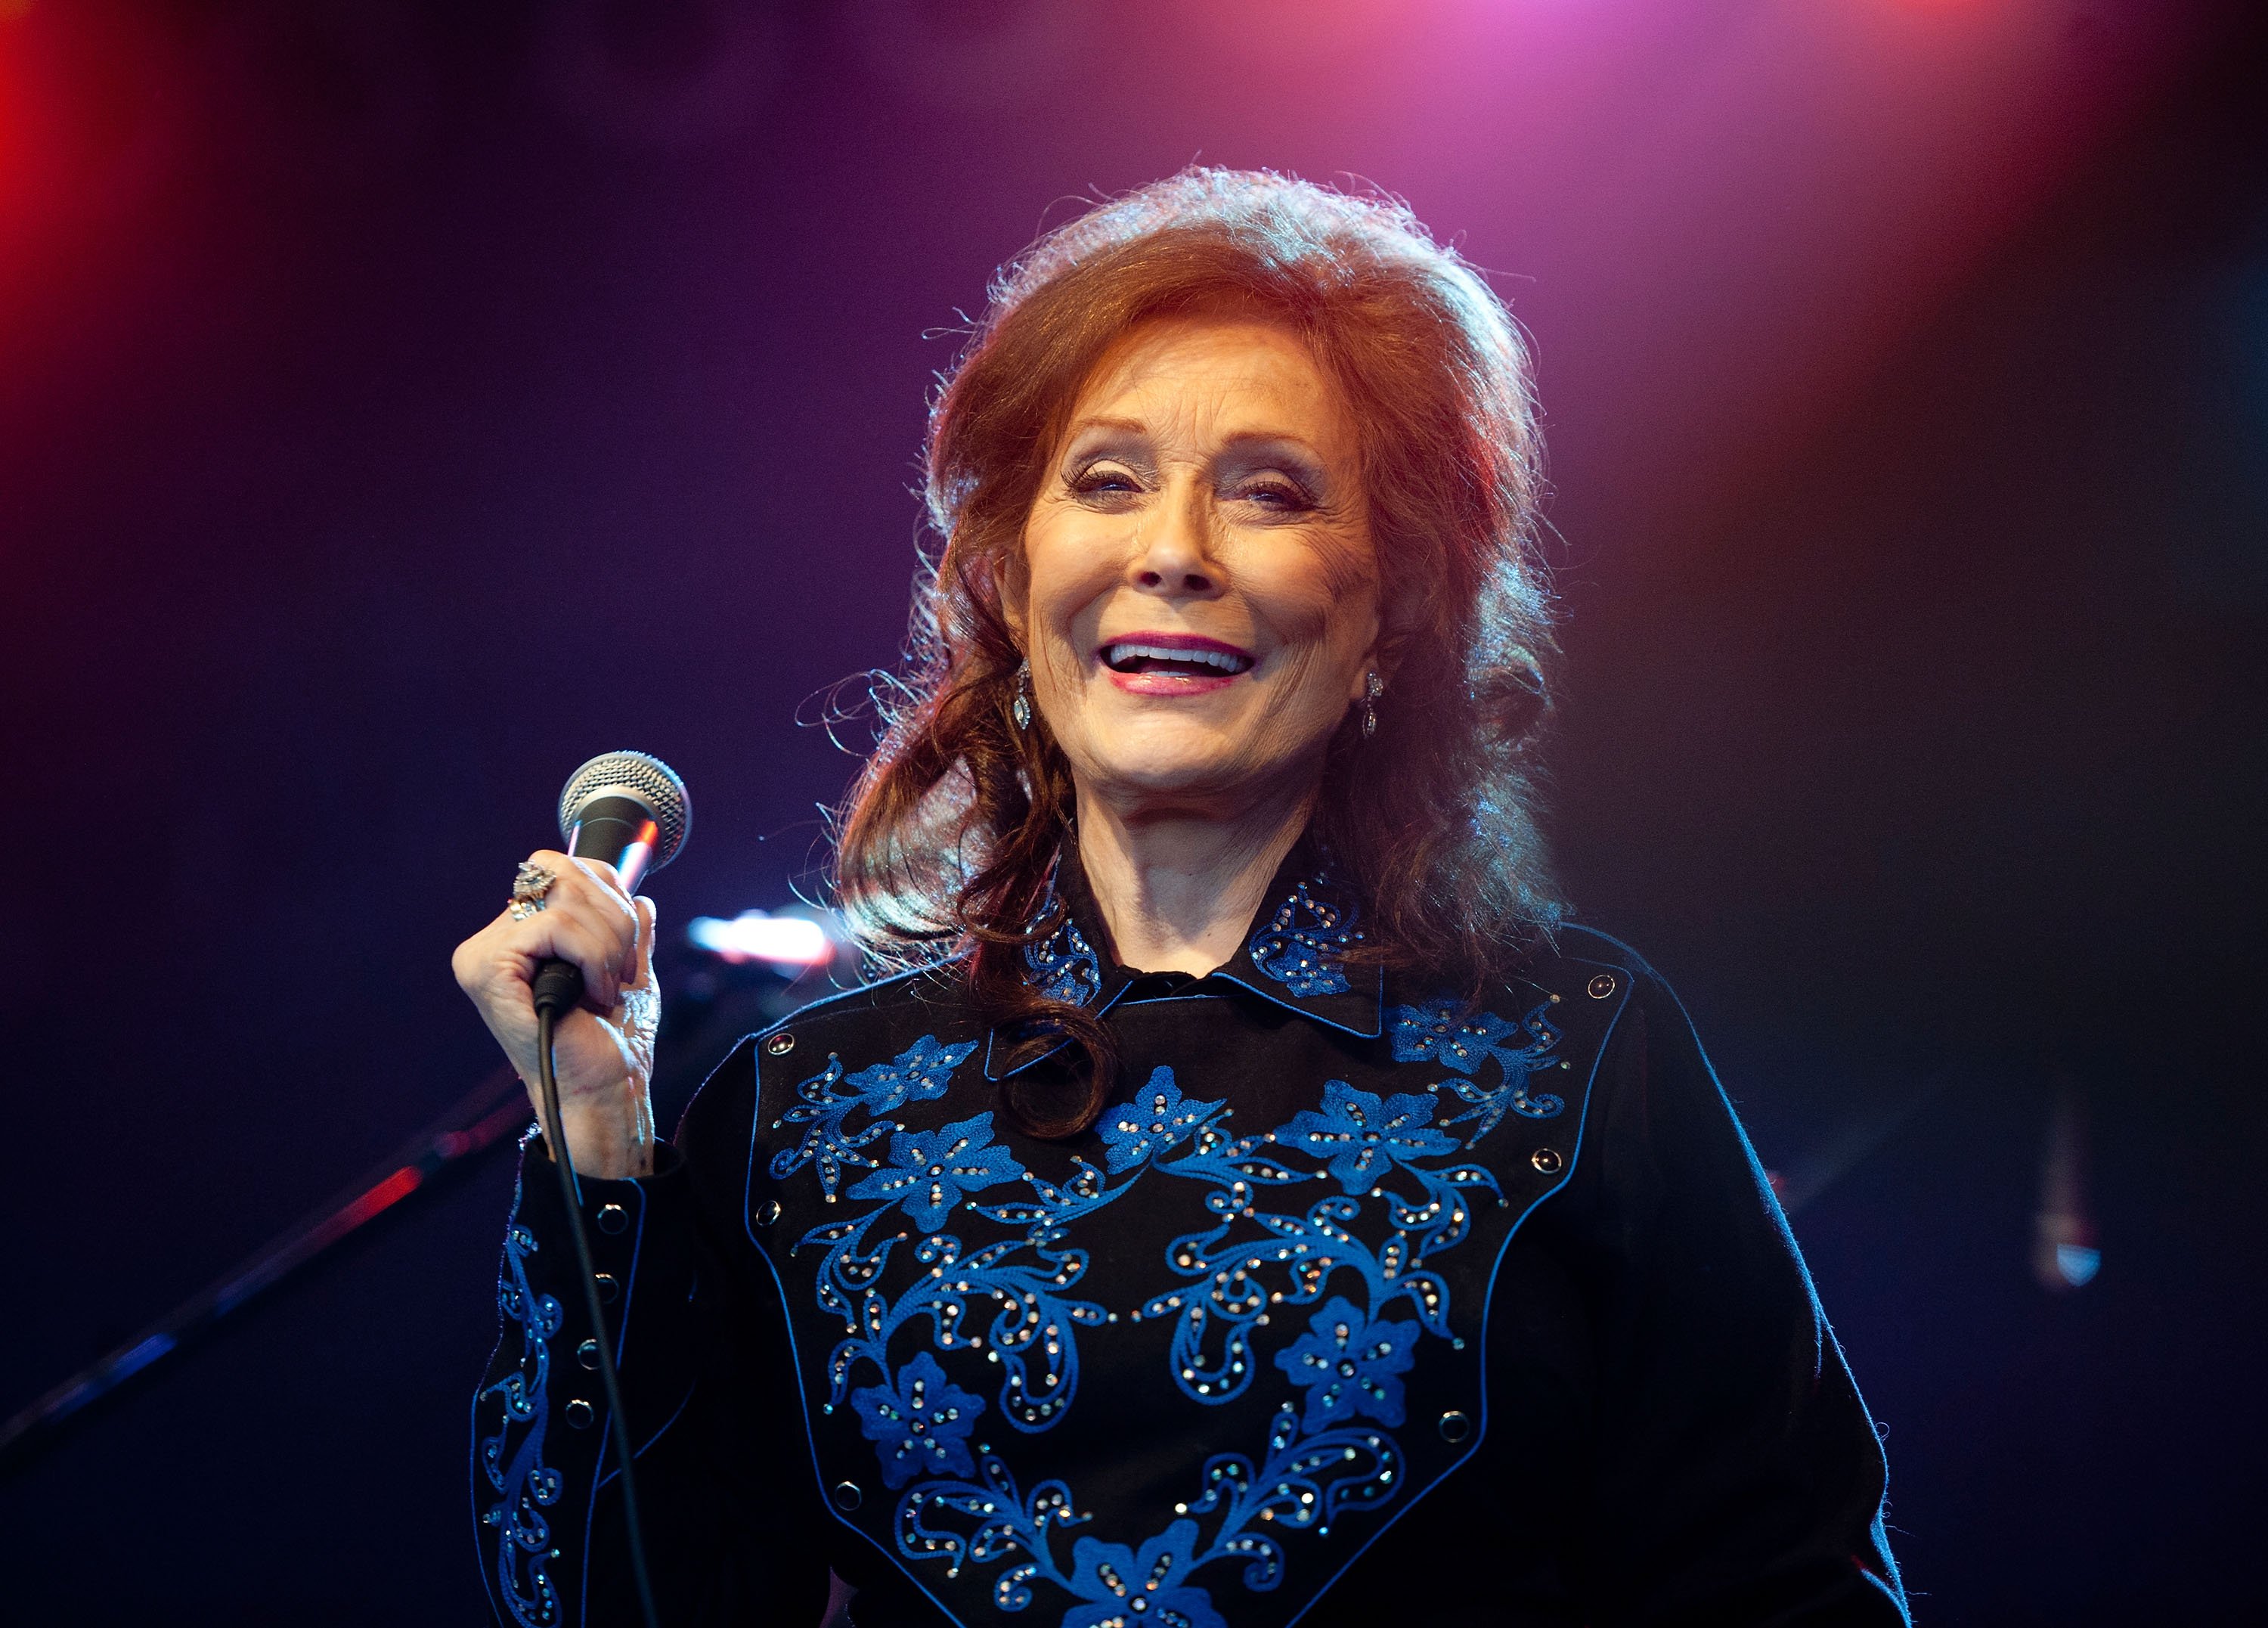 Loretta Lynn smiles while holding up a microphone